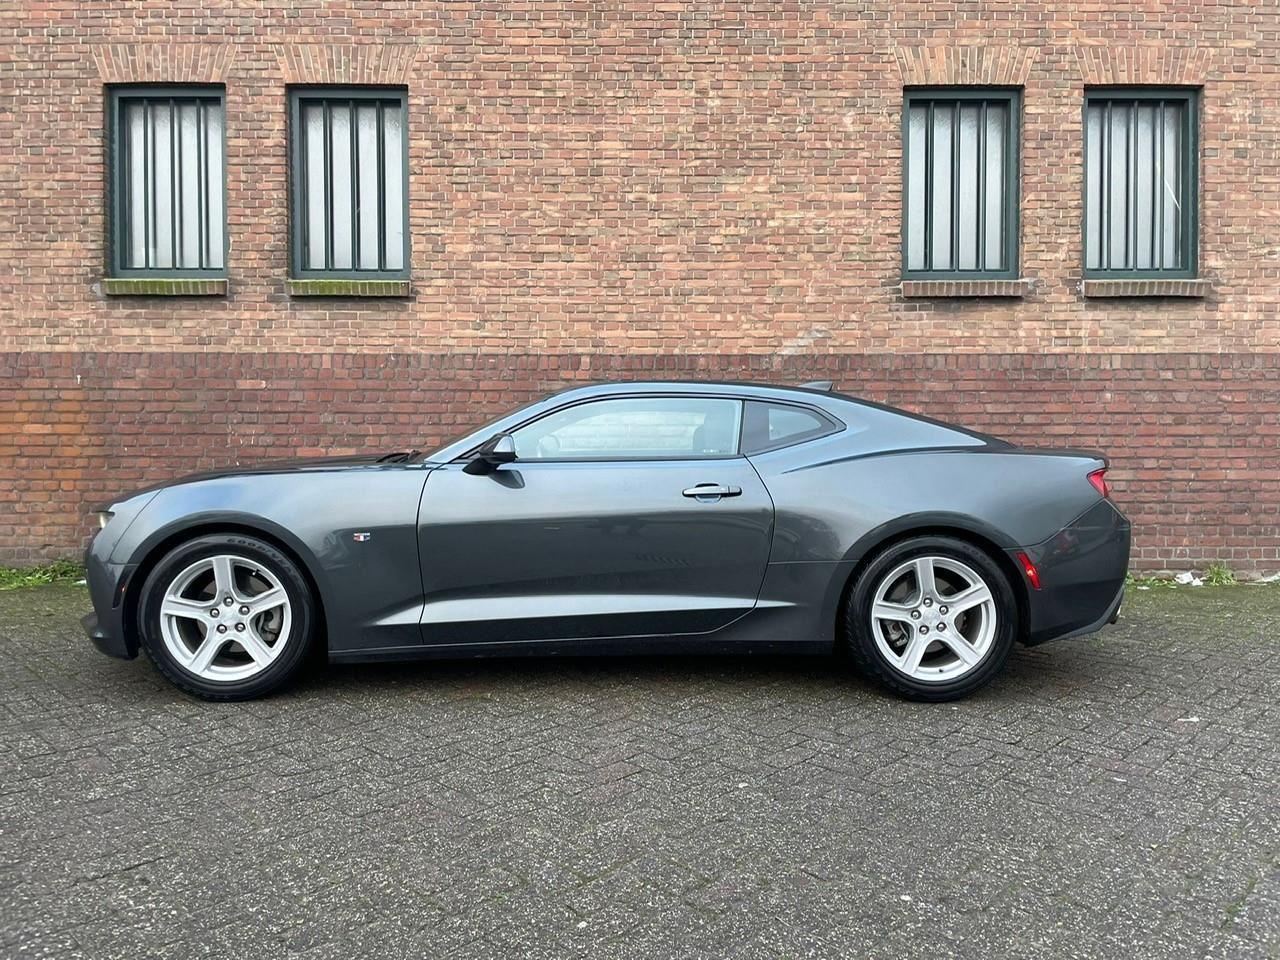 Chevrolet CAMARO RS occasion - Styl Cars